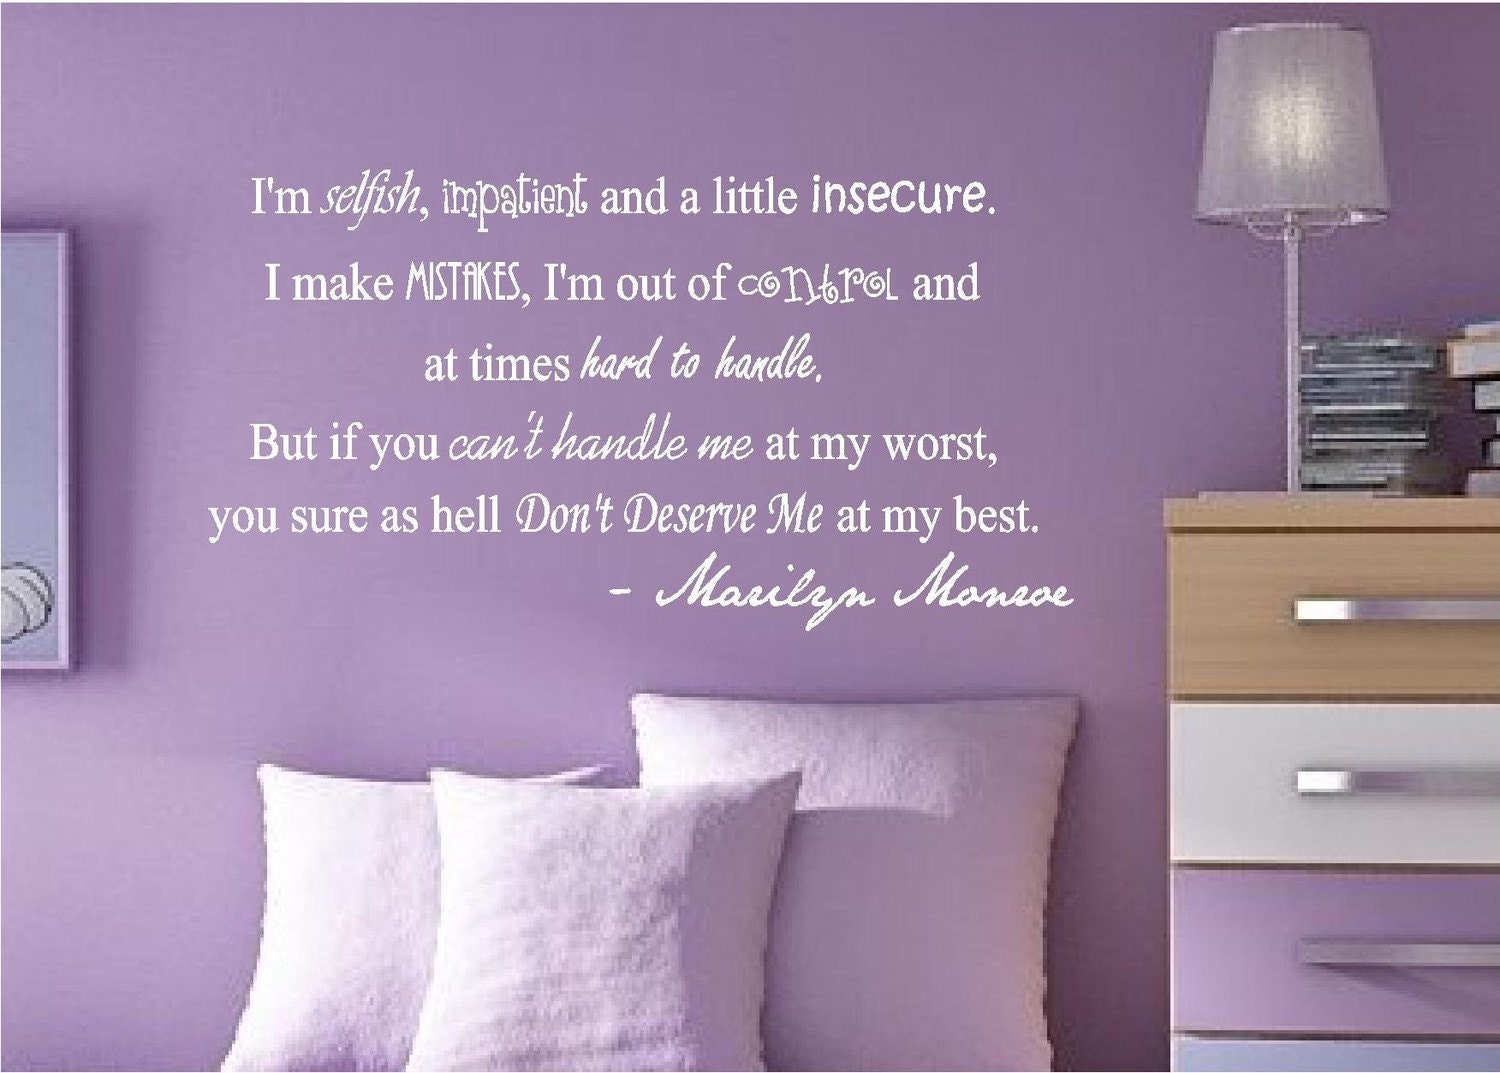 Marilyn Monroe Quote Vinyl Wall Decal Sticker by YourVinylAnswer